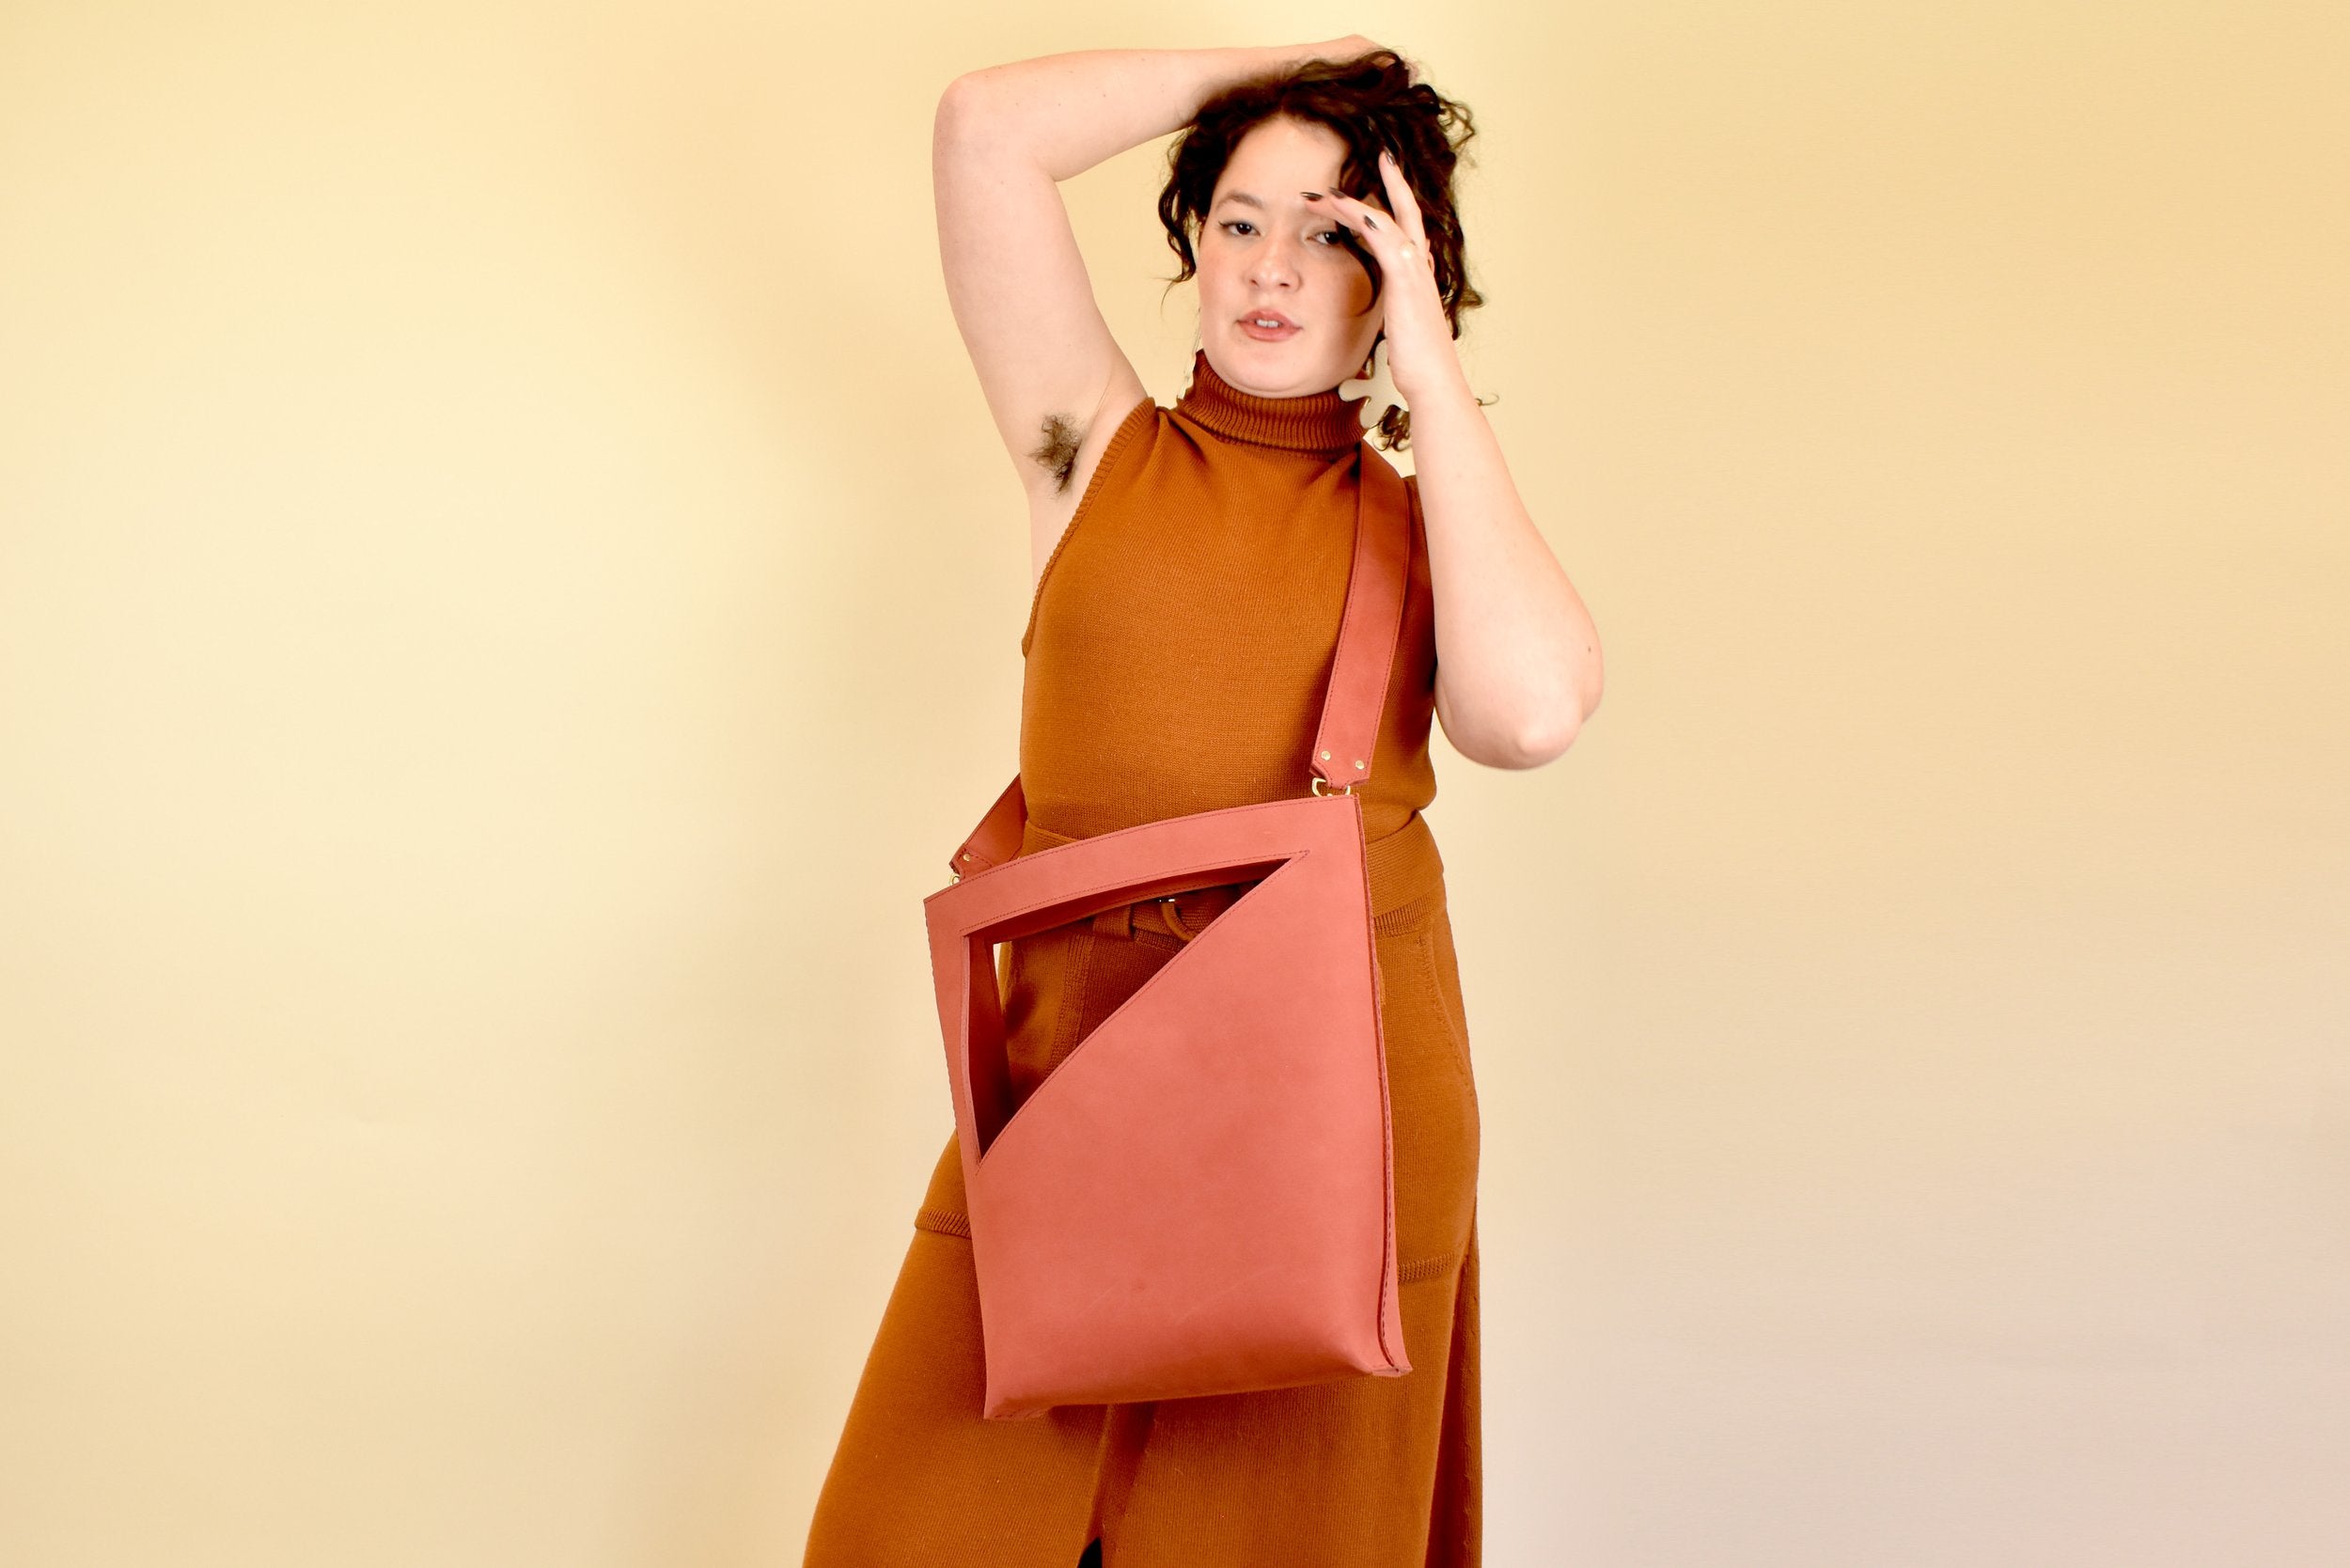 The Tritote: a Leather Crossbody Tote Bag / Handbag in Butter Red Clay